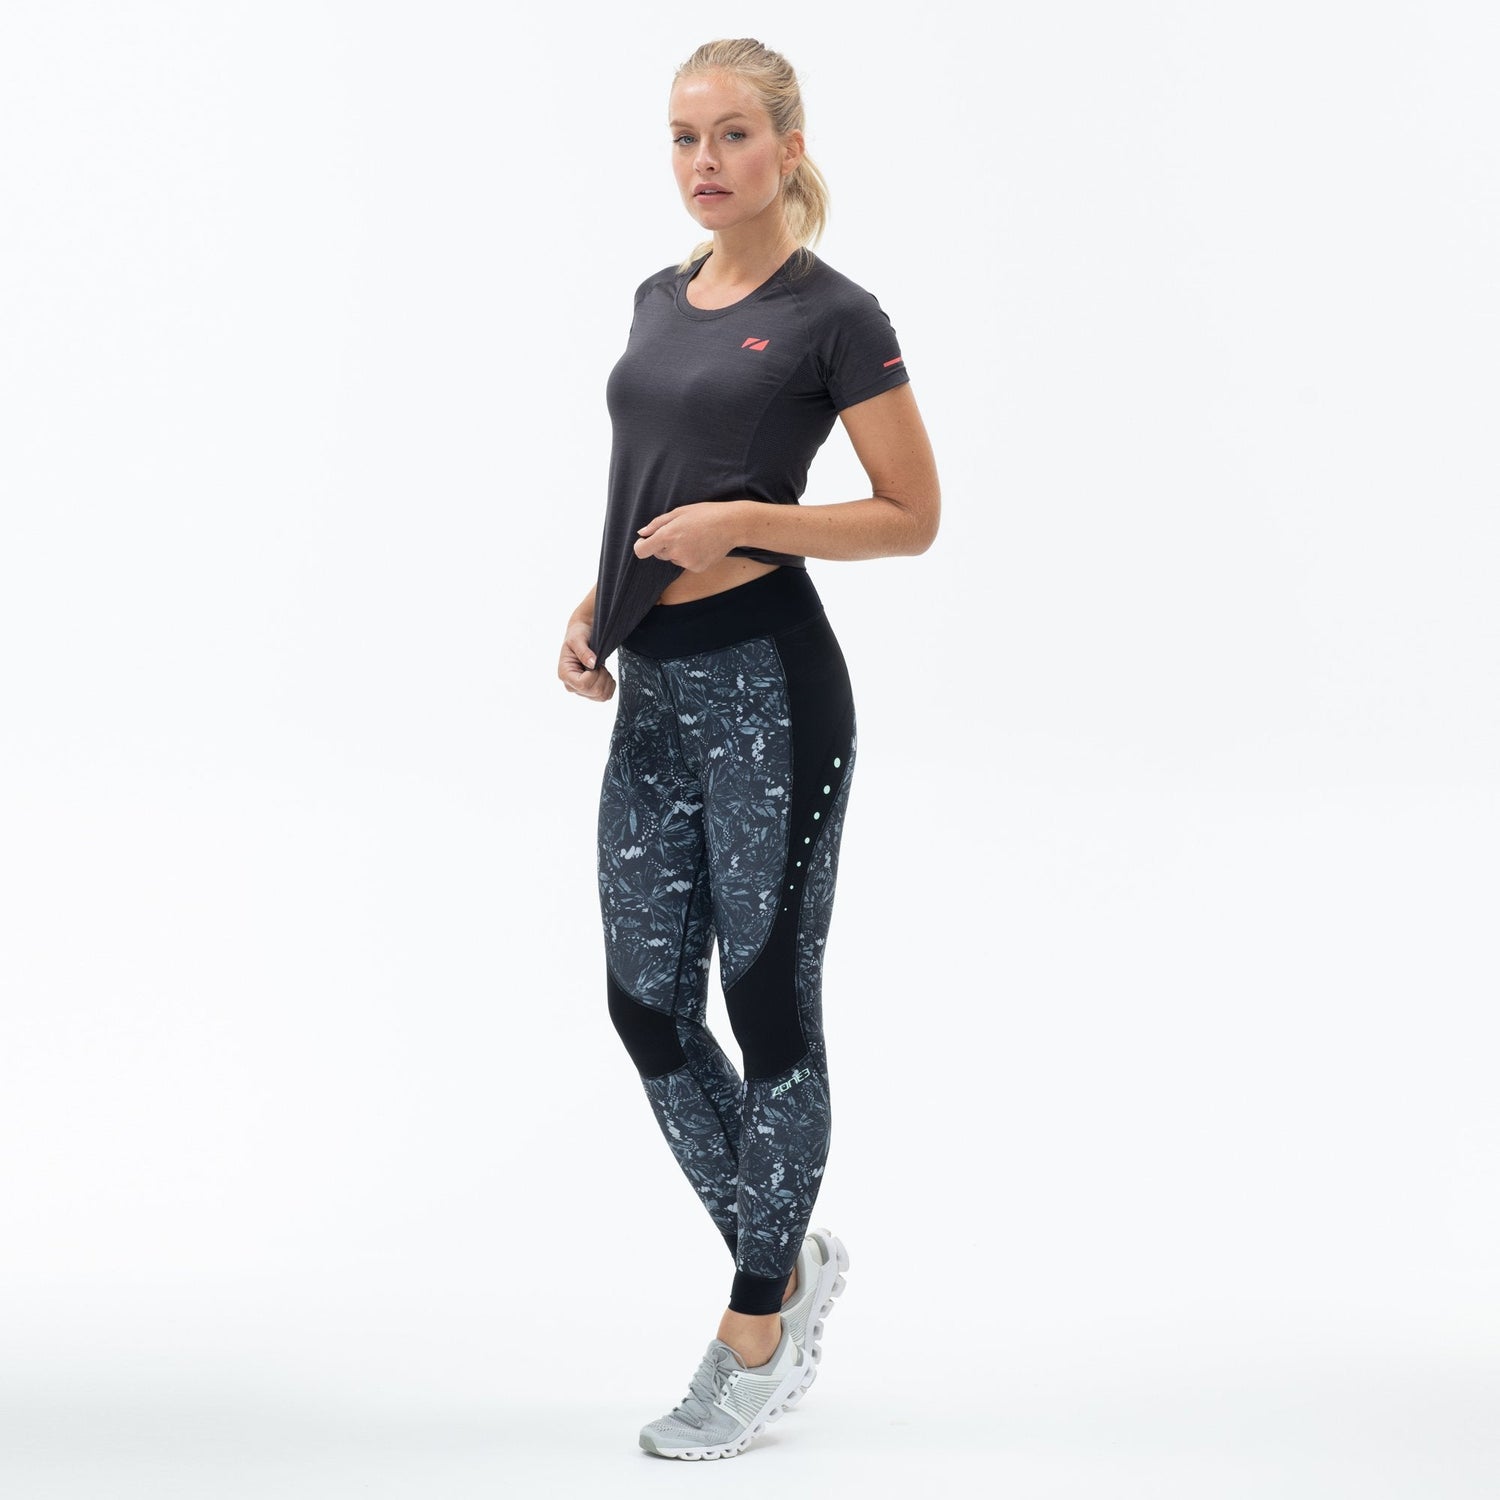 Zone3 RX3 Medical Grade Compression Tights: Tested and Reviewed